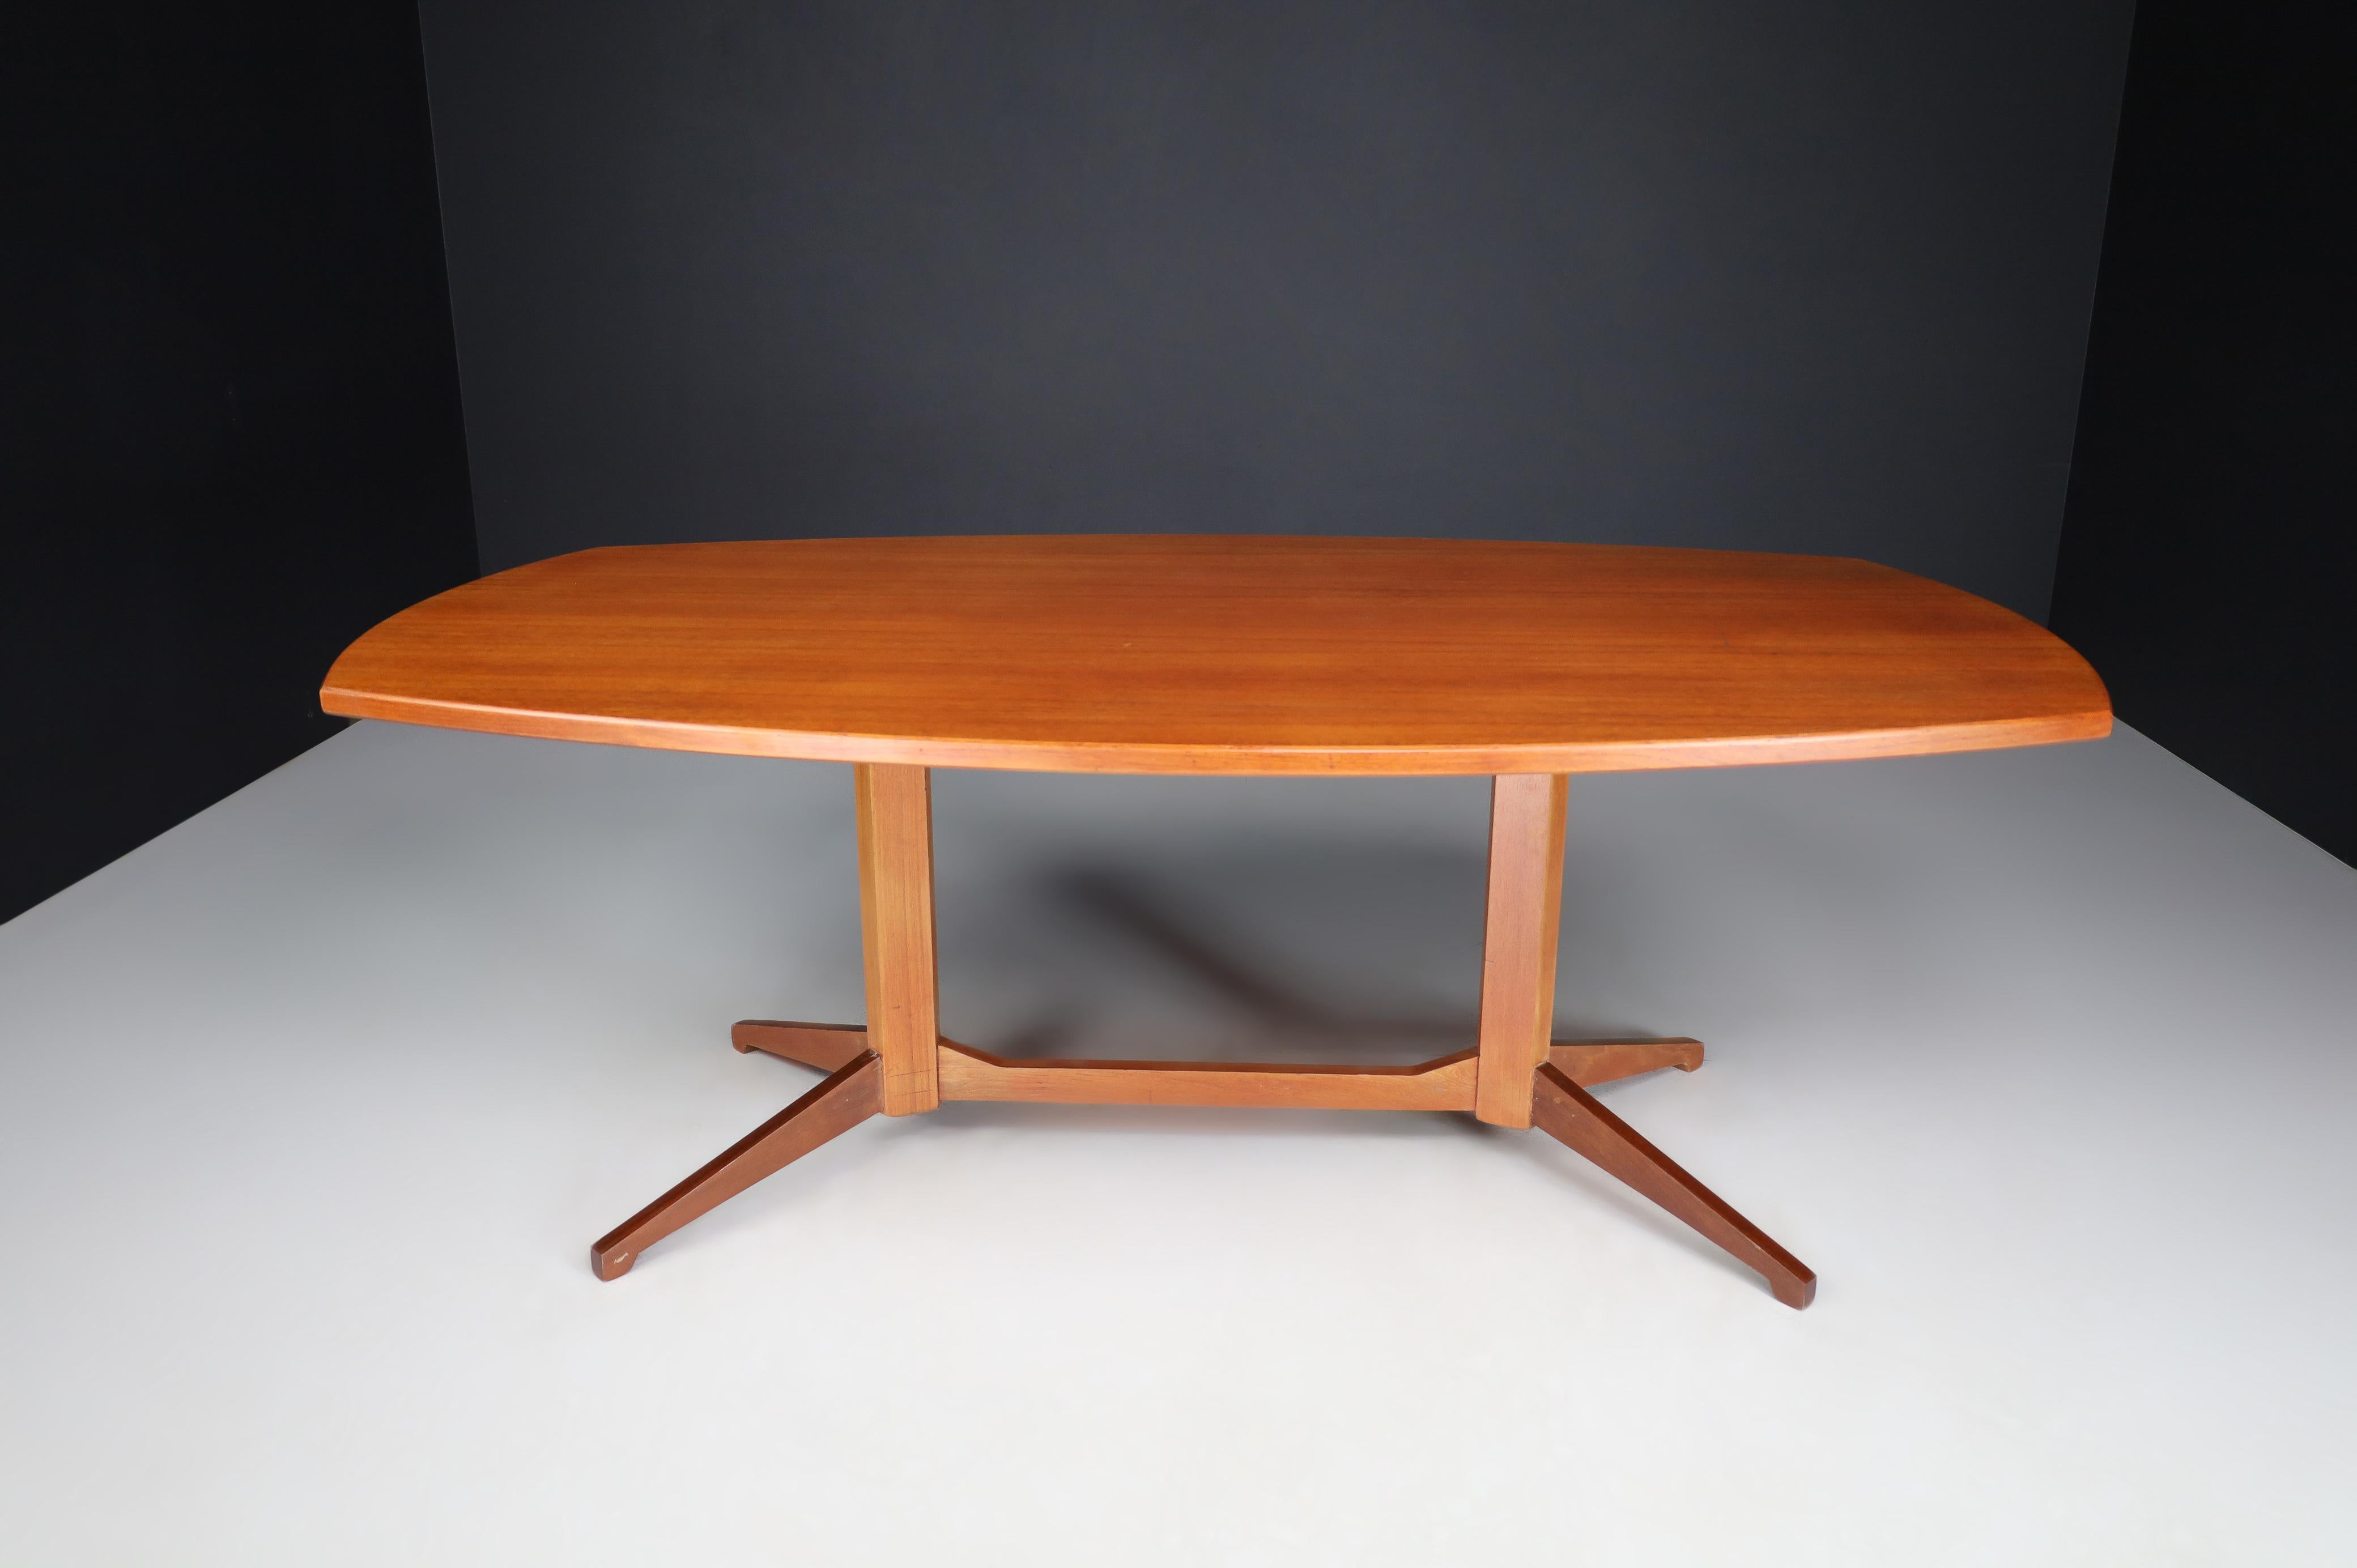 Franco Albini for Poggi table or desk, Italy, 1960s

Walnut table TL22 model by Franco Albini for Poggi Italy 1960s. It is in excellent condition, with a minor patina on the wood parts. This unique table or desk would be an eye-catching addition